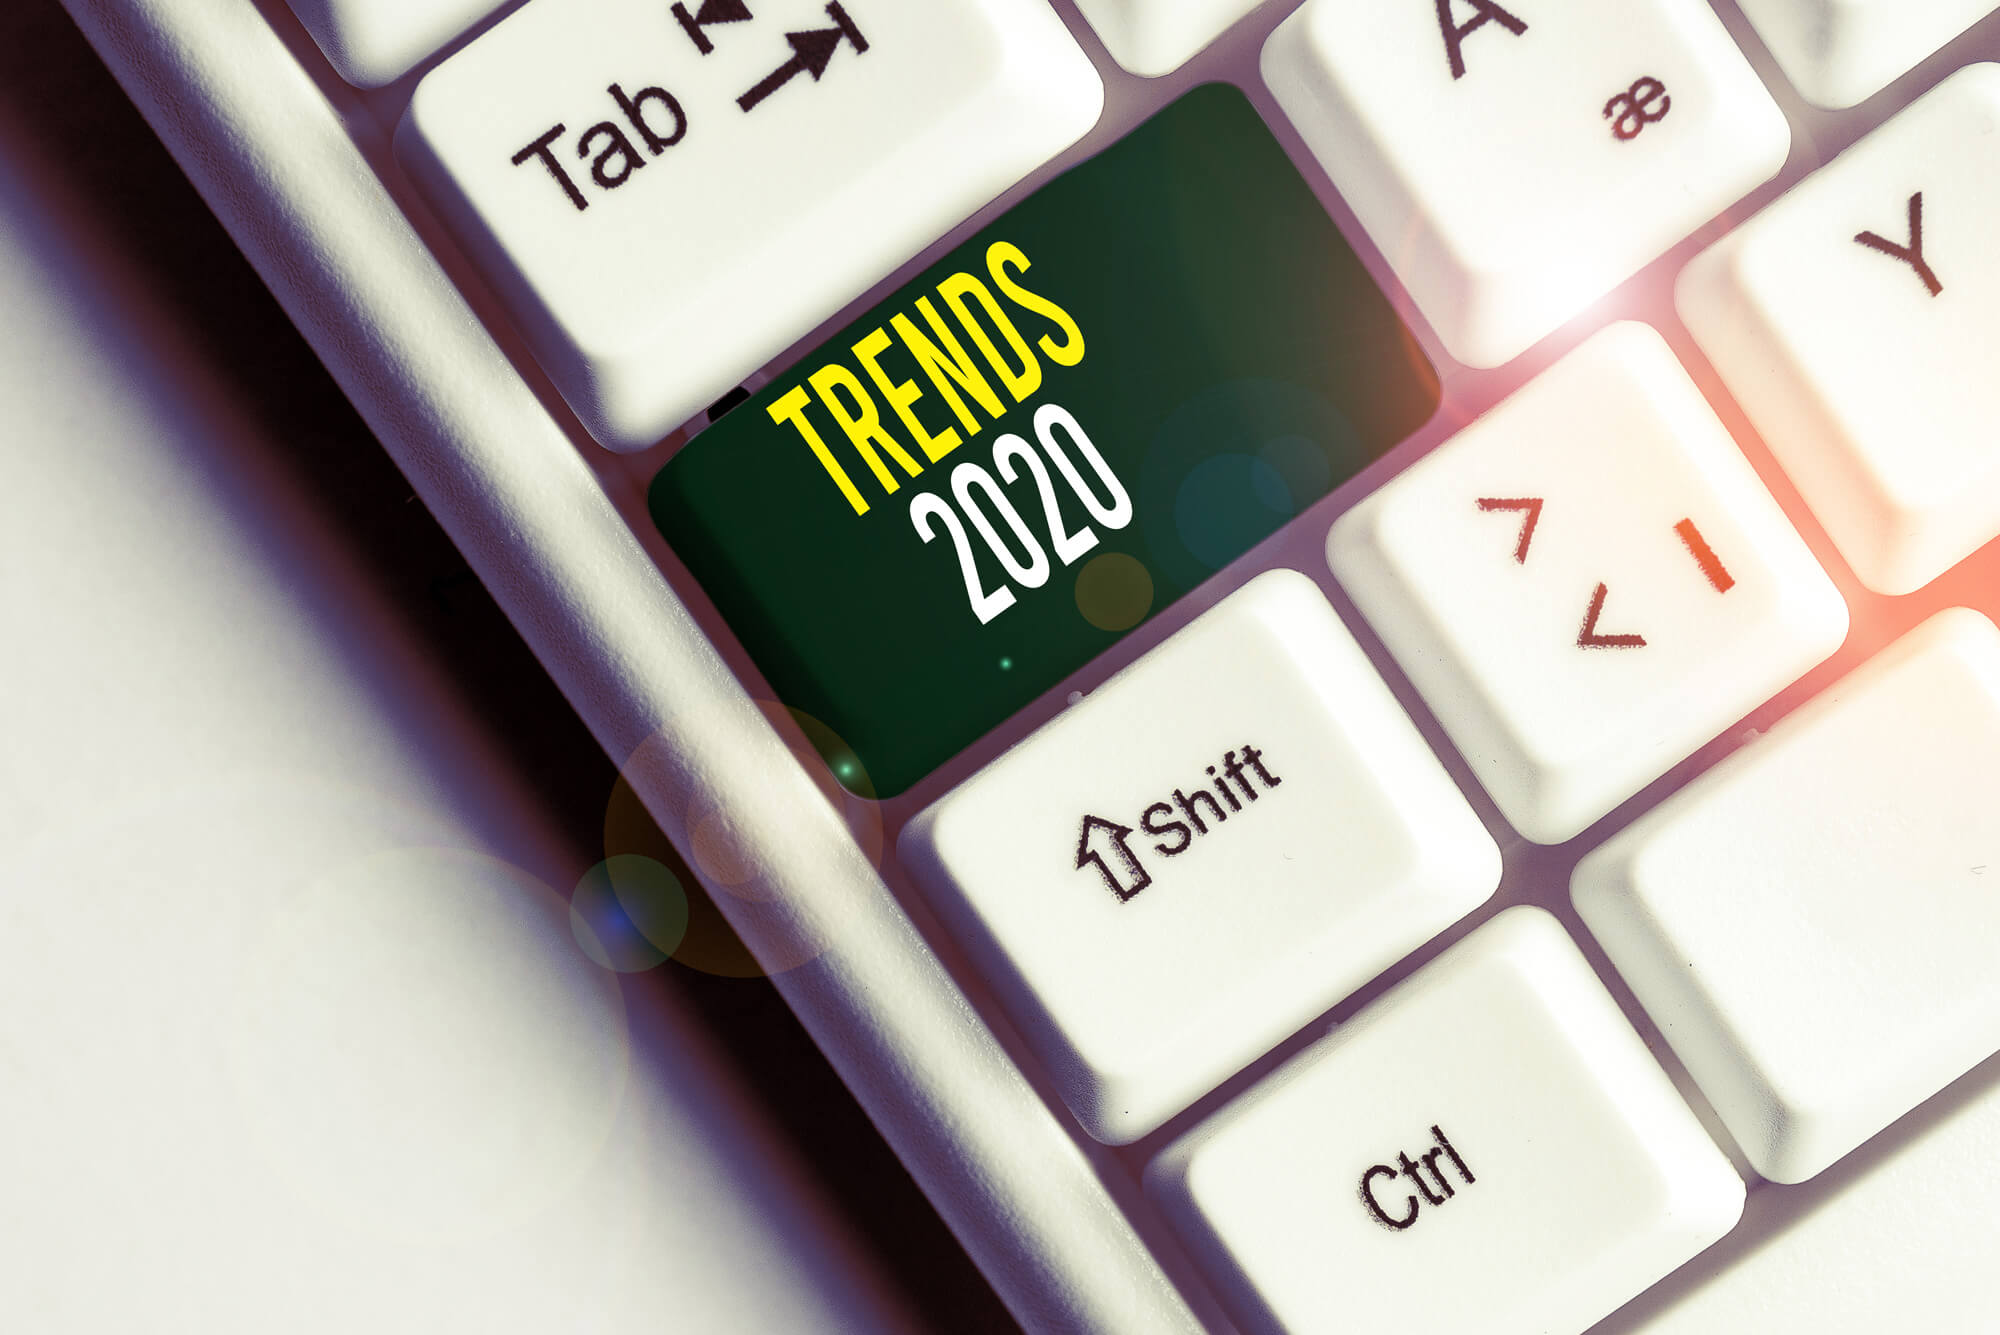 2020 trends button on a laptop